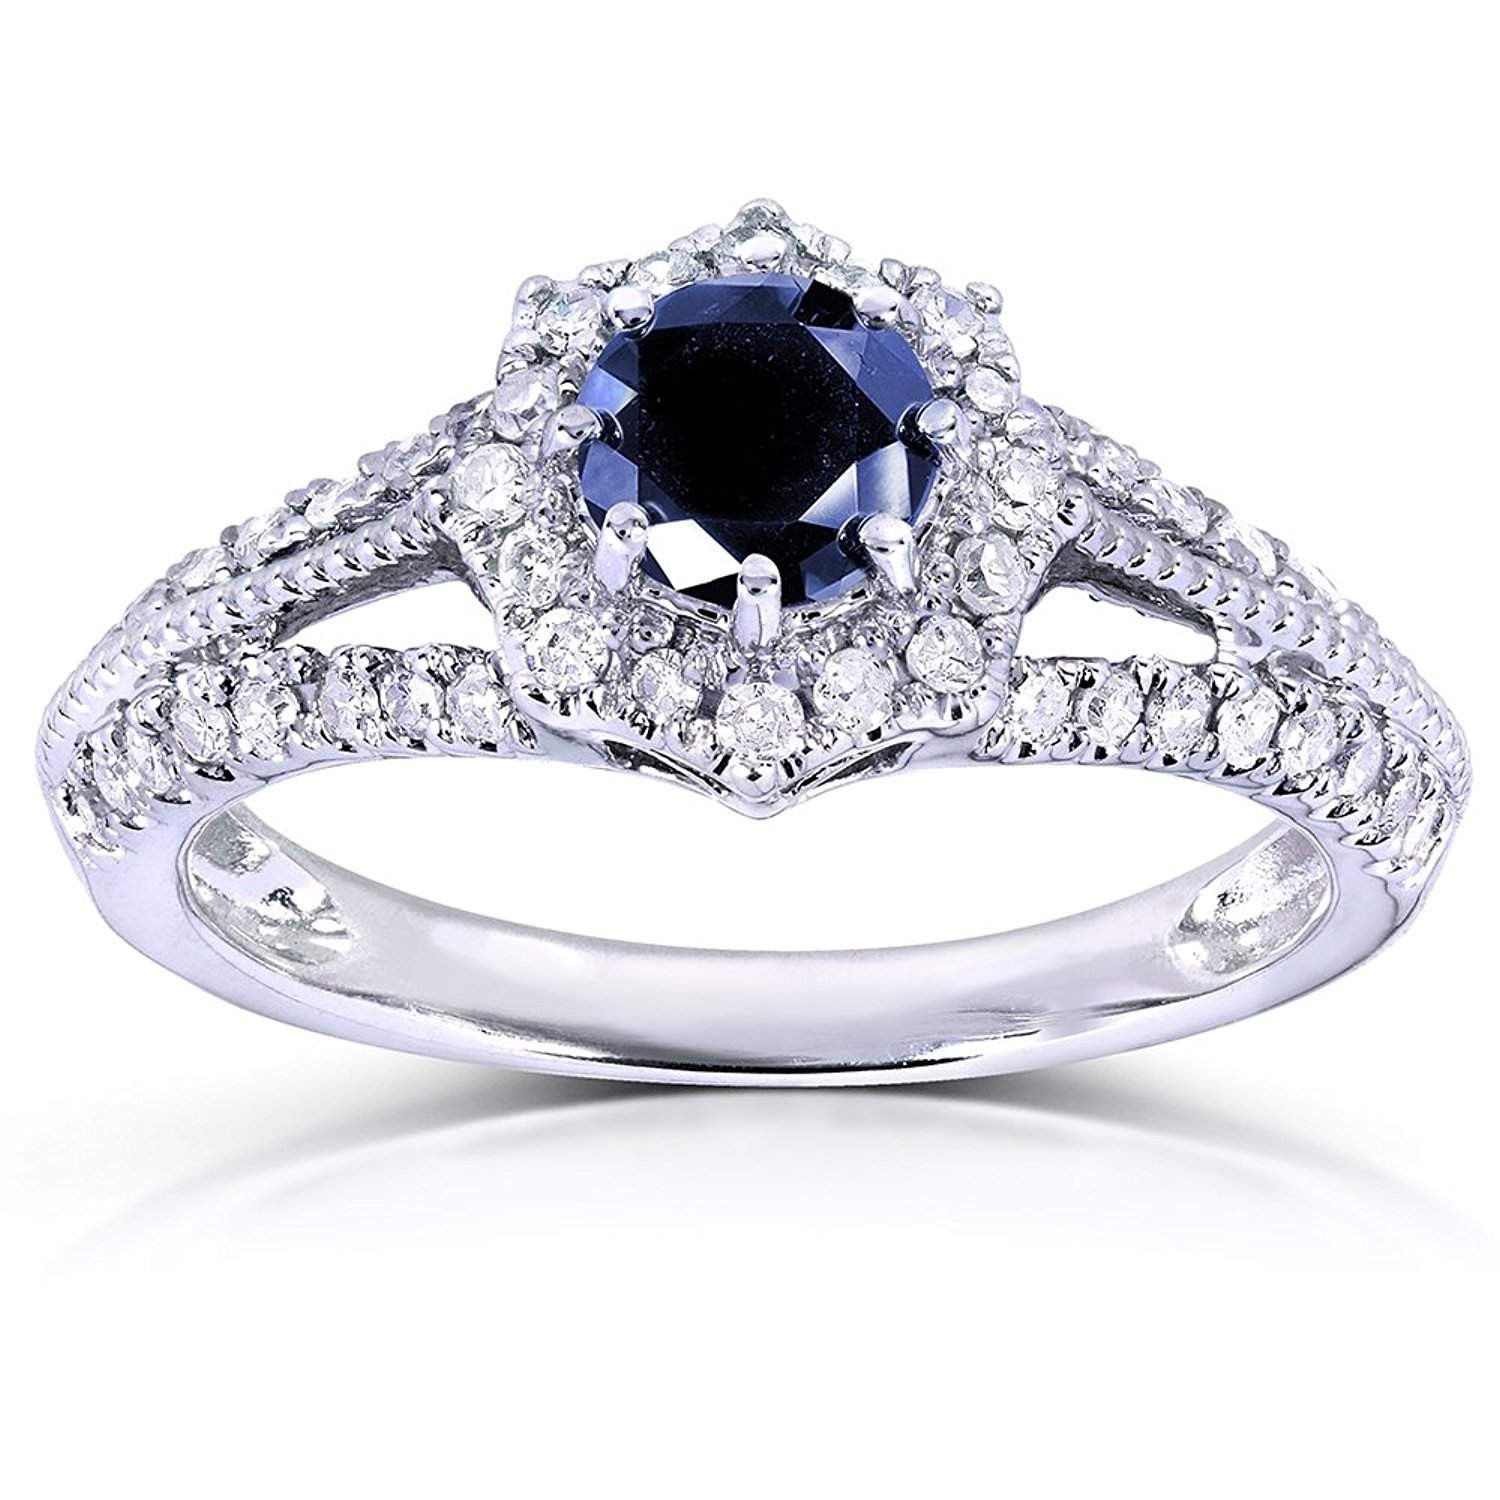 Wedding Rings Cheap
 Top 10 Best Valentine’s Day Deals on Engagement Rings